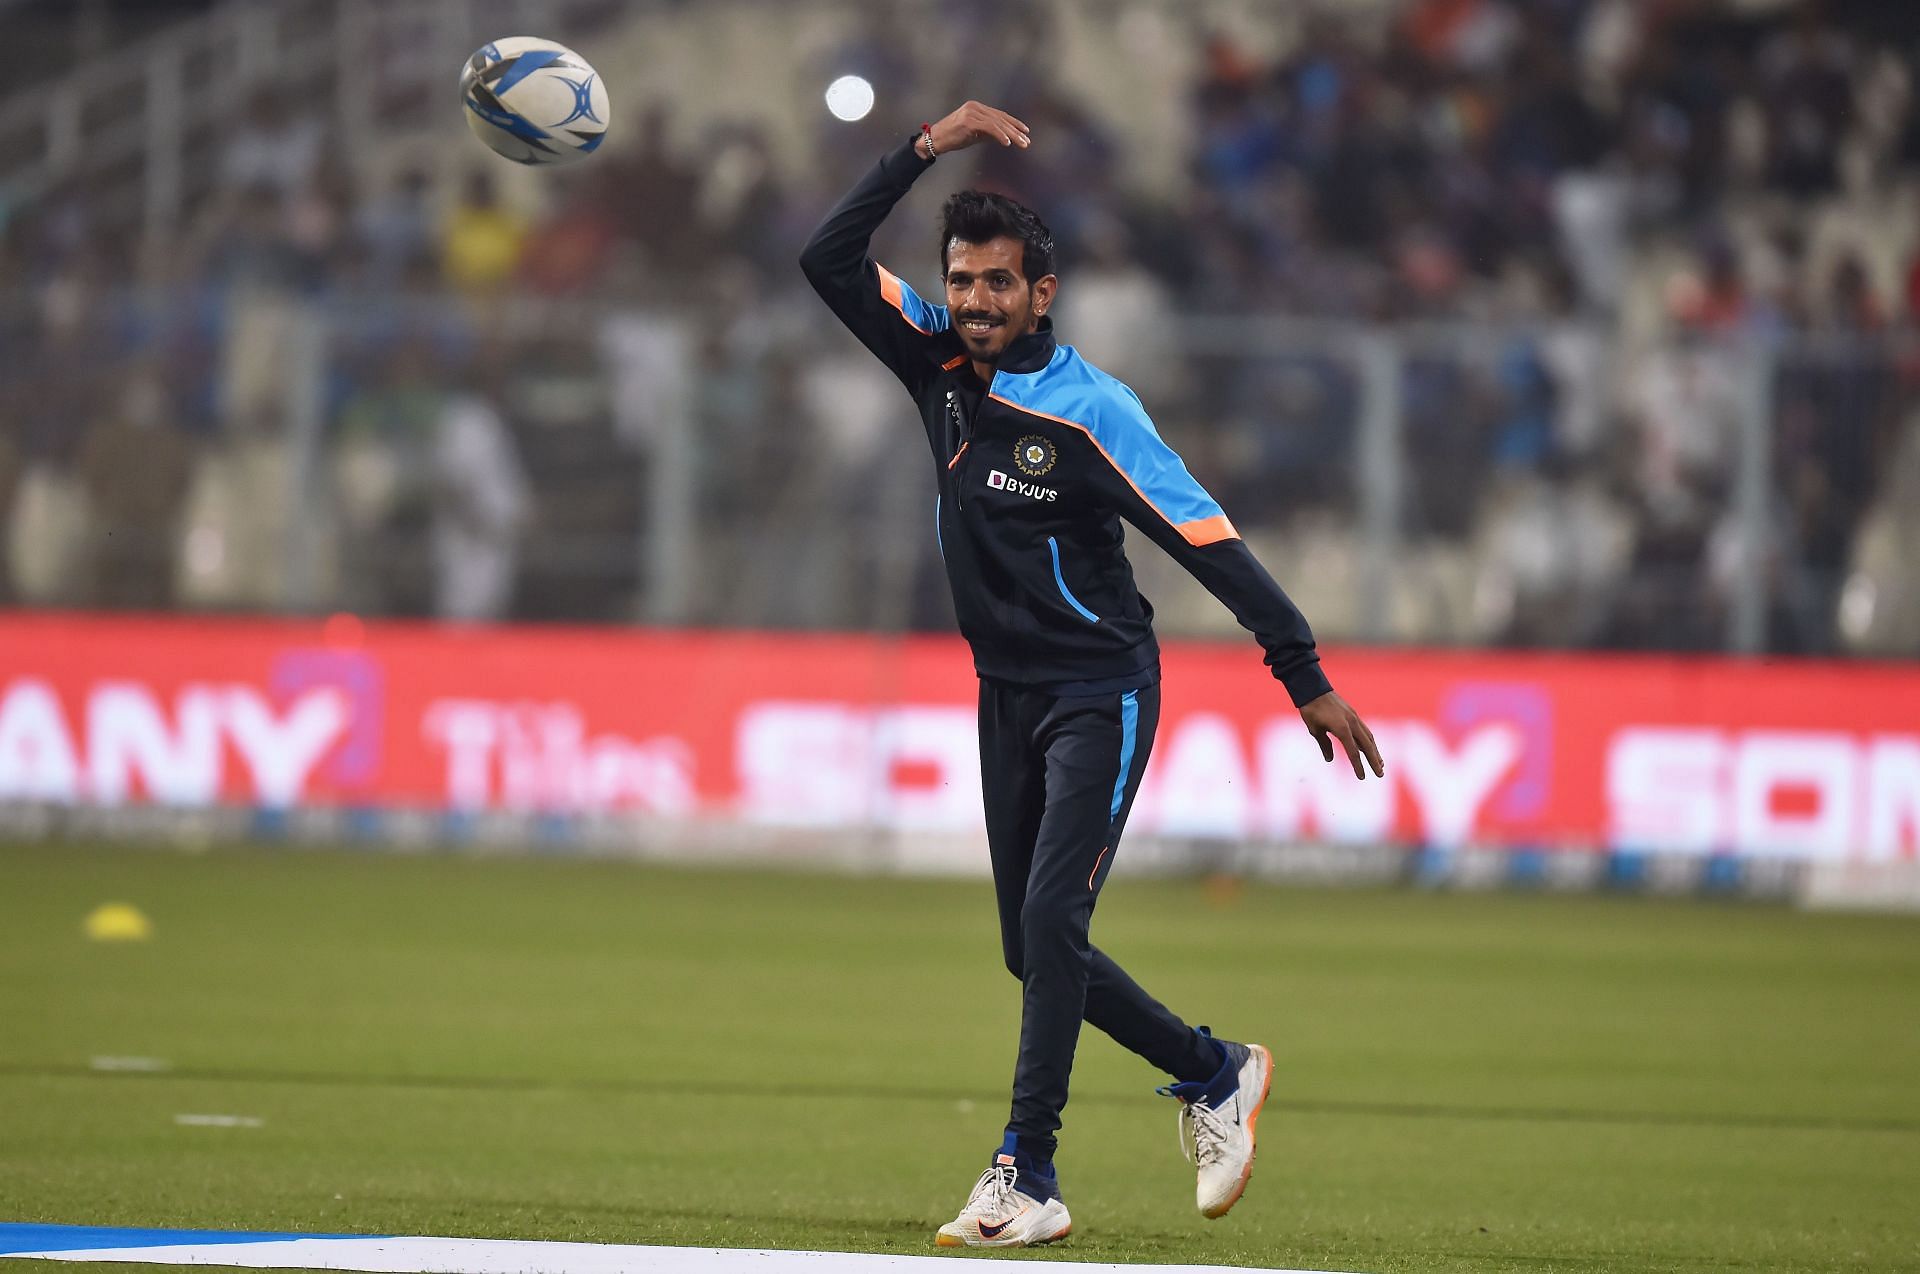 Yuzvendra Chahal was dropped for the ICC T20 World Cup 2021